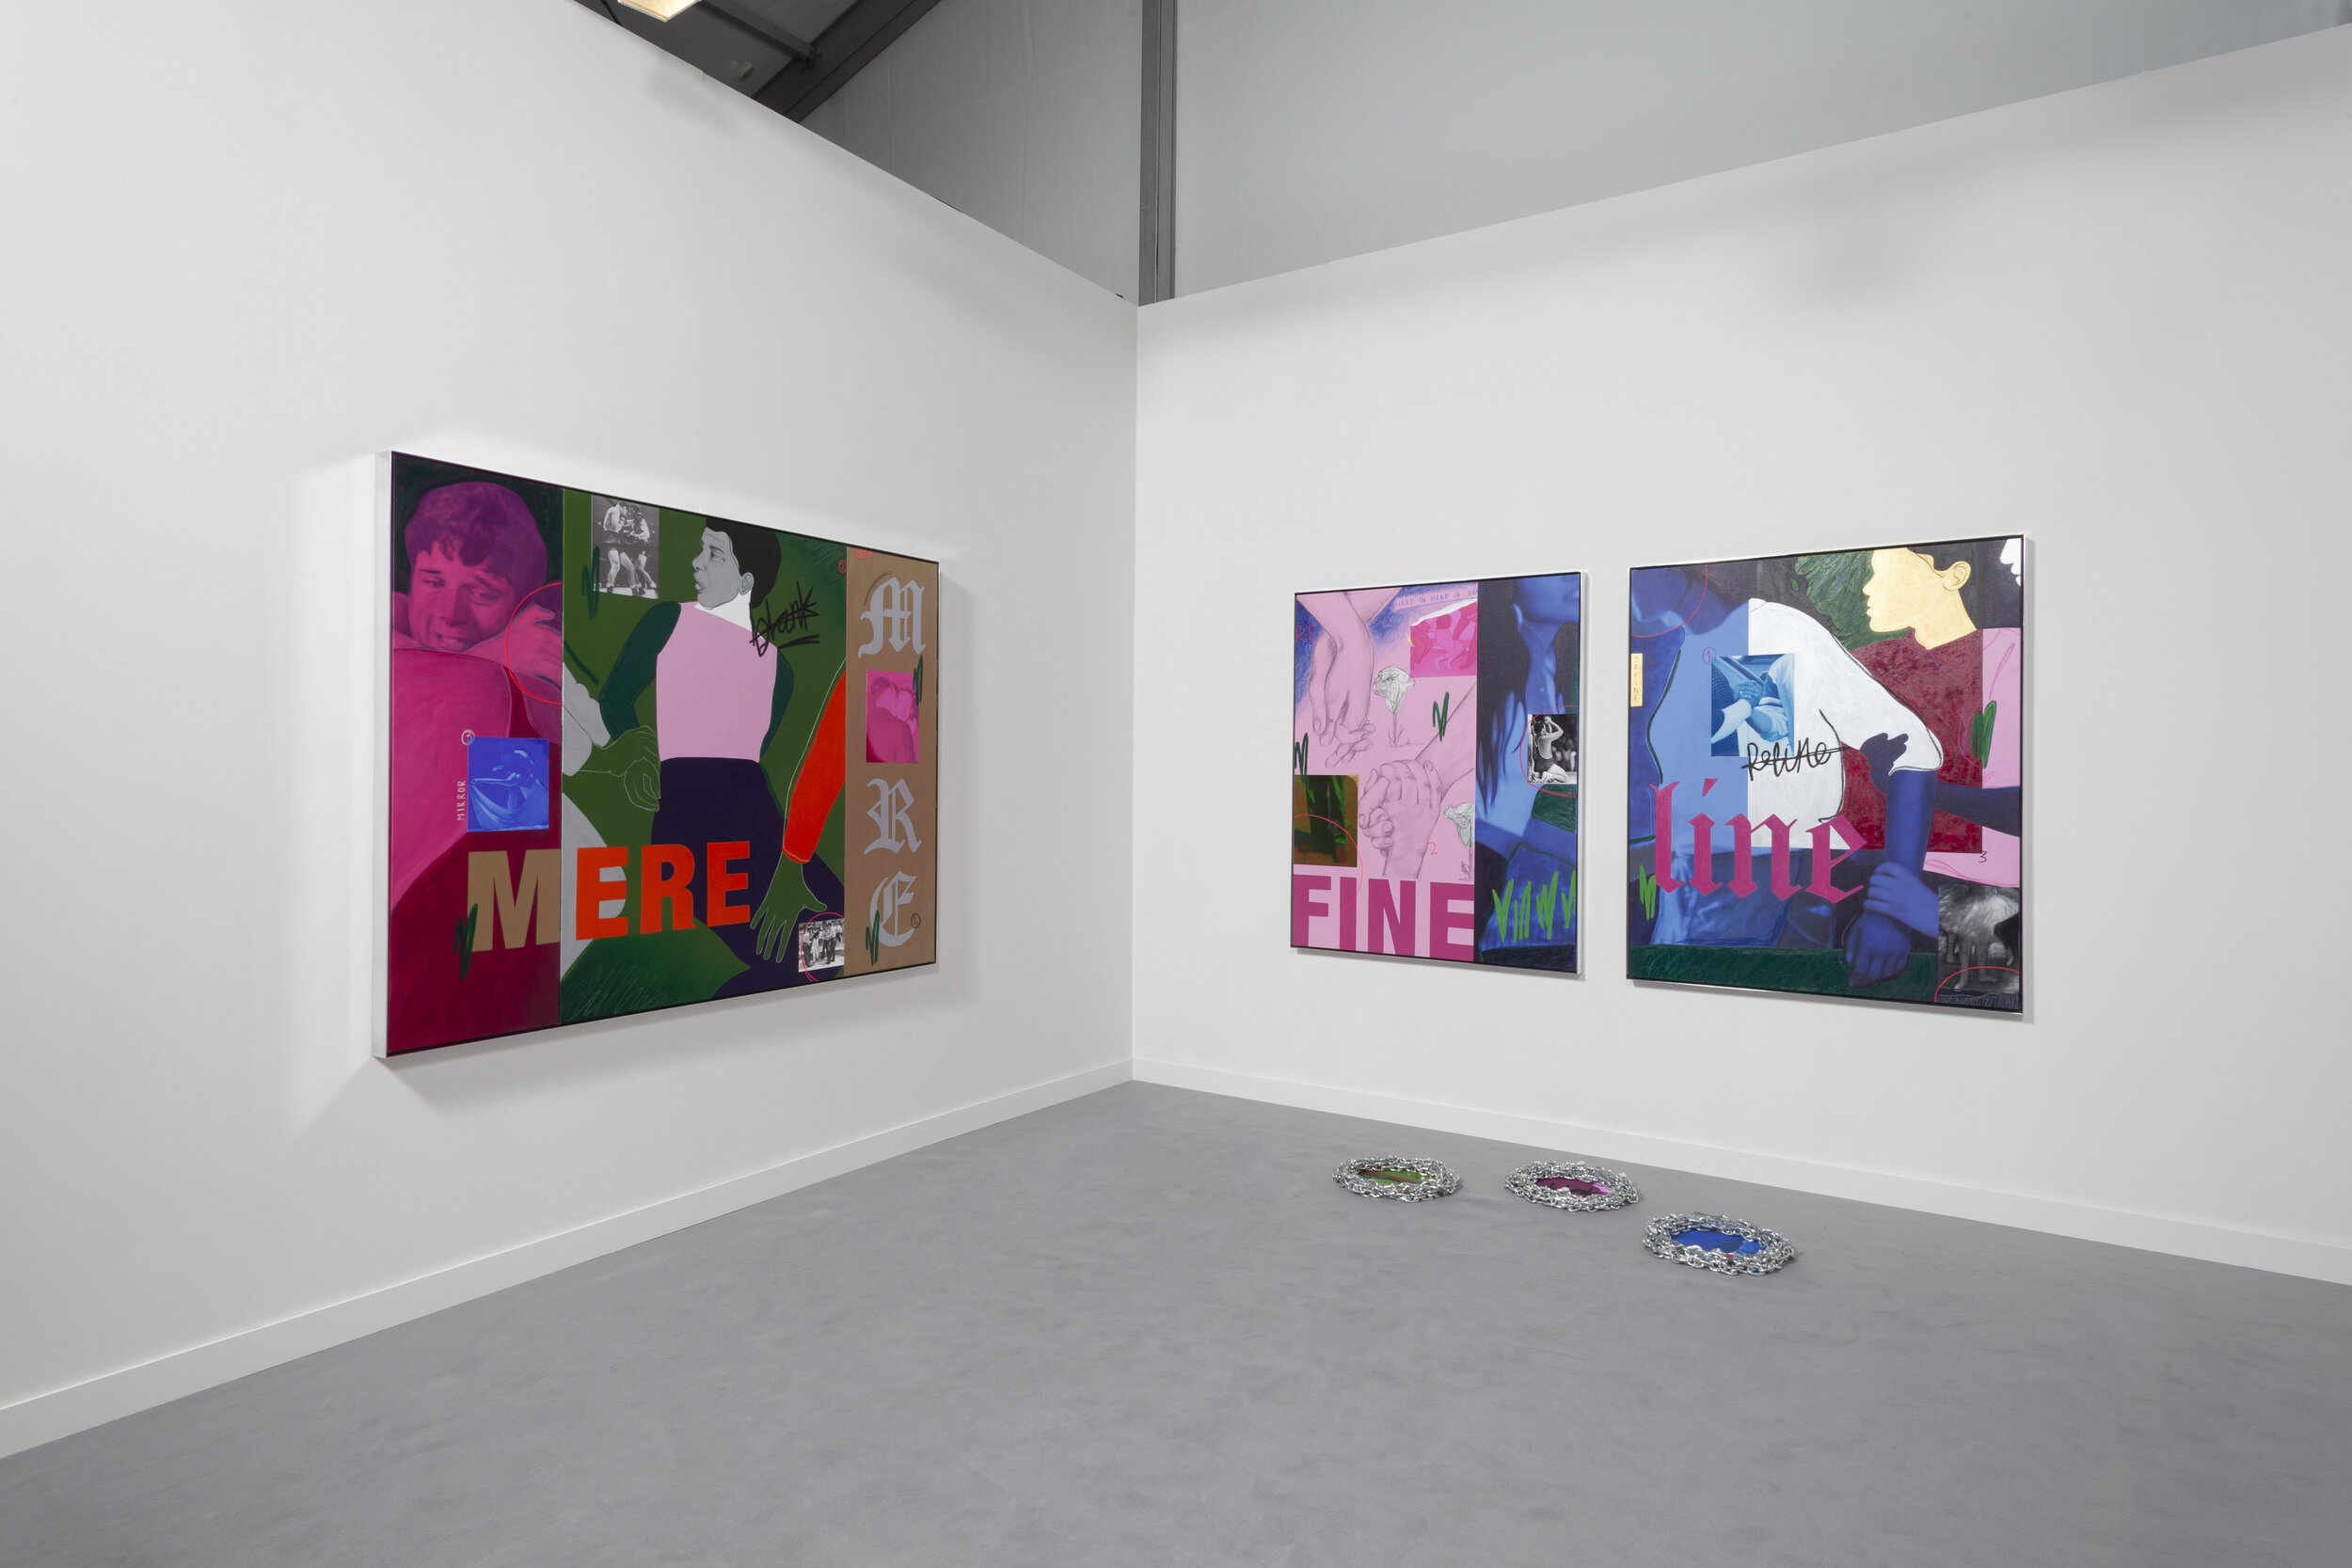  Gabriella Sanchez, Booth Installation at Frieze Los Angeles, February 2020 